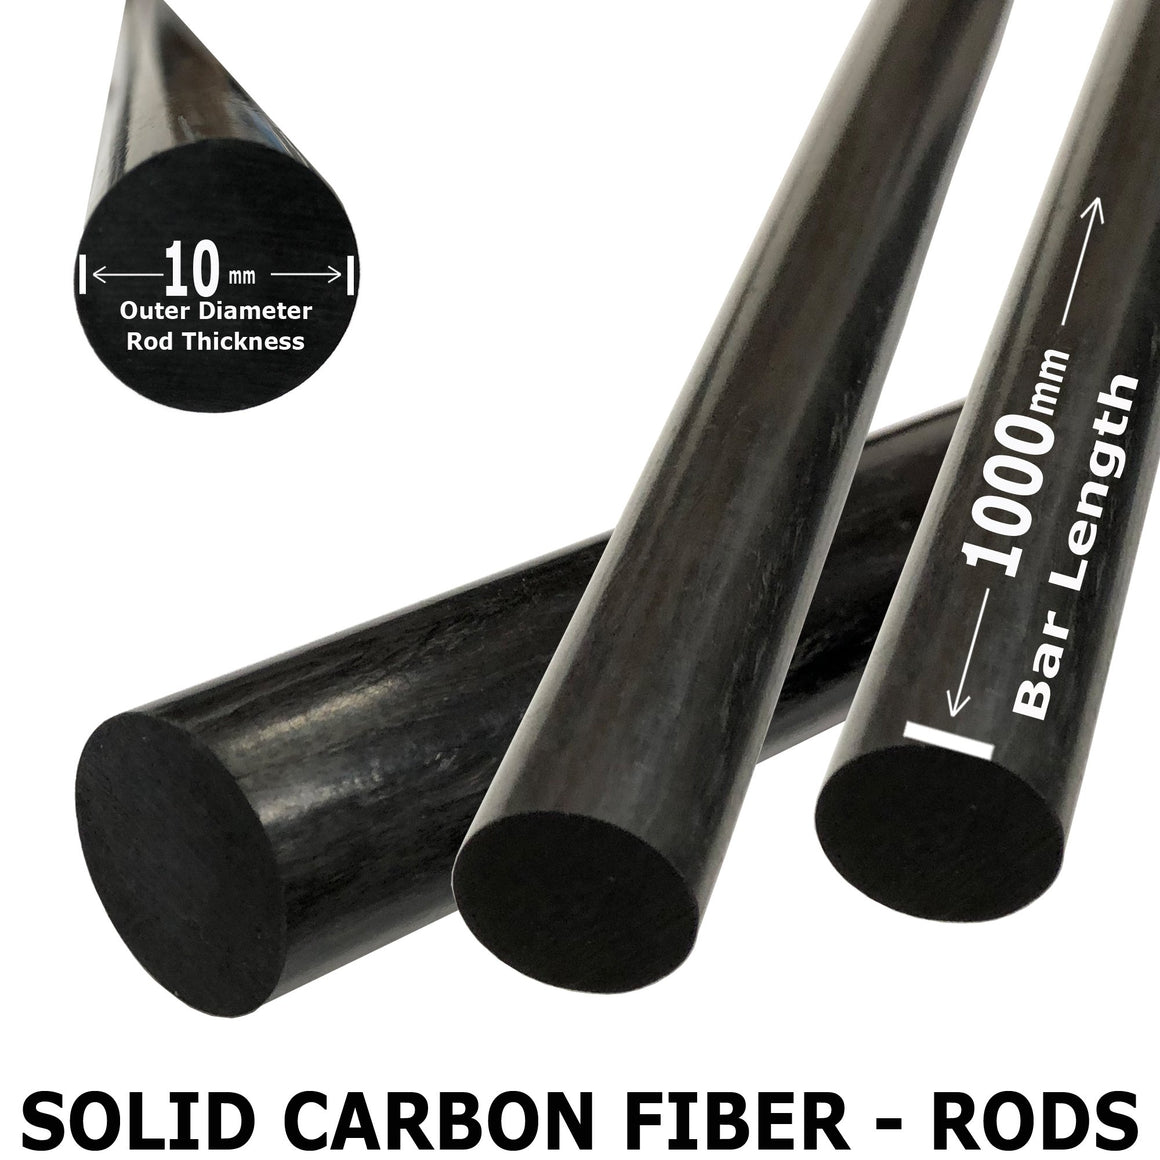 (2) Pieces - 10mm x 1000mm Carbon Fiber RODS - Solid Pultruded Round Rods. Super High Strength for RC Hobbies, Drones, Special Projects